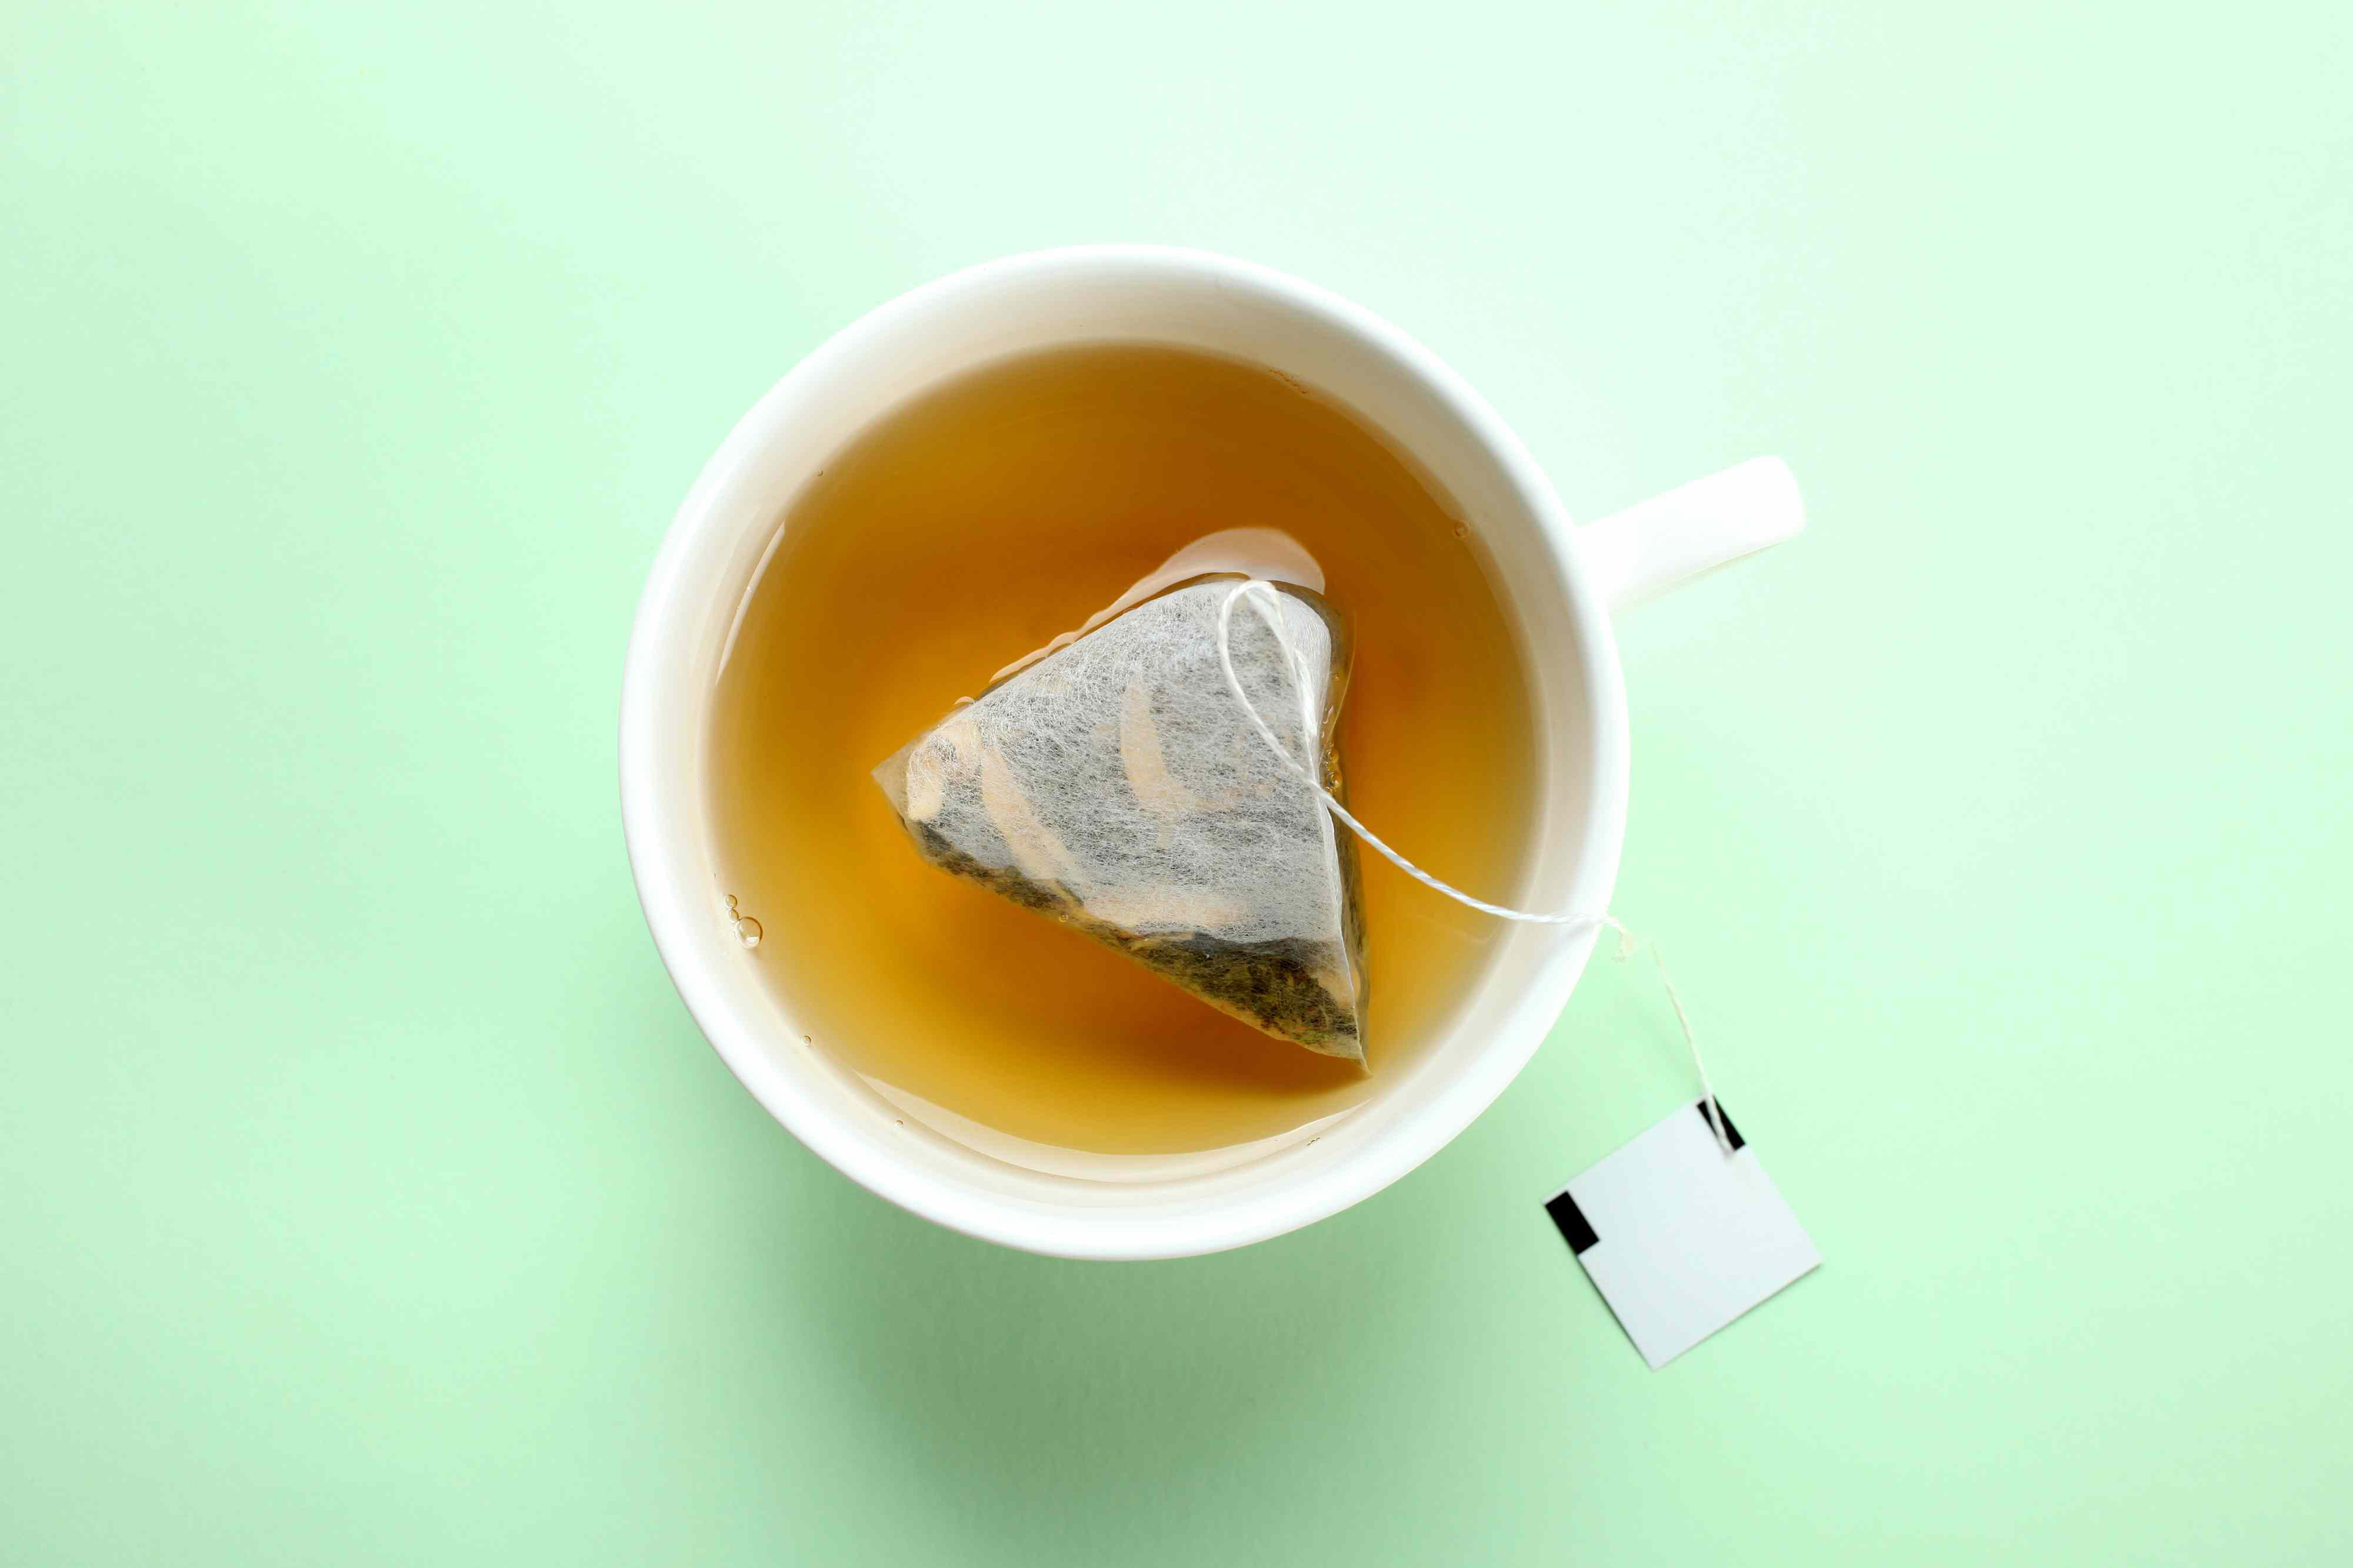 Green Tea Does Have Caffeine, But Not as Much as Coffee—Here's Why